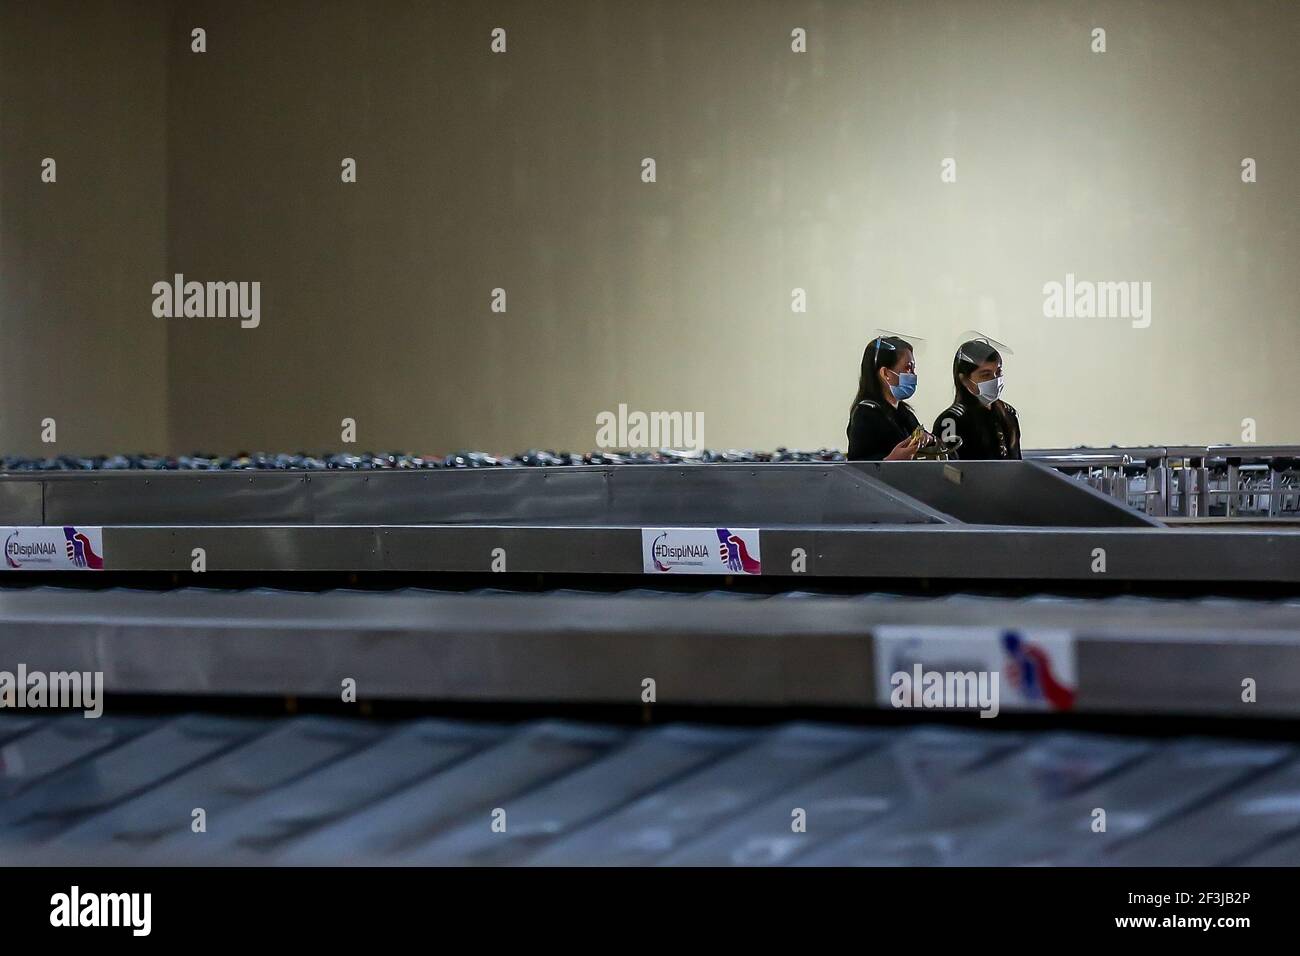 (210317) -- MANILA, March 17, 2021 (Xinhua) -- Airport employees wearing face masks are seen inside the Terminal 1 of the Ninoy Aquino International Airport in Manila, the Philippines, on March 17, 2021. The Philippines said it will temporarily suspend the entry of foreigners and some citizens as the Southeast Asian country battles a renewed spike in COVID-19 cases. In a statement issued on Tuesday night, the country's coronavirus task force said foreign citizens and returning nationals who had not been working overseas will not be able to enter the country from March 20 until April 19 under Stock Photo